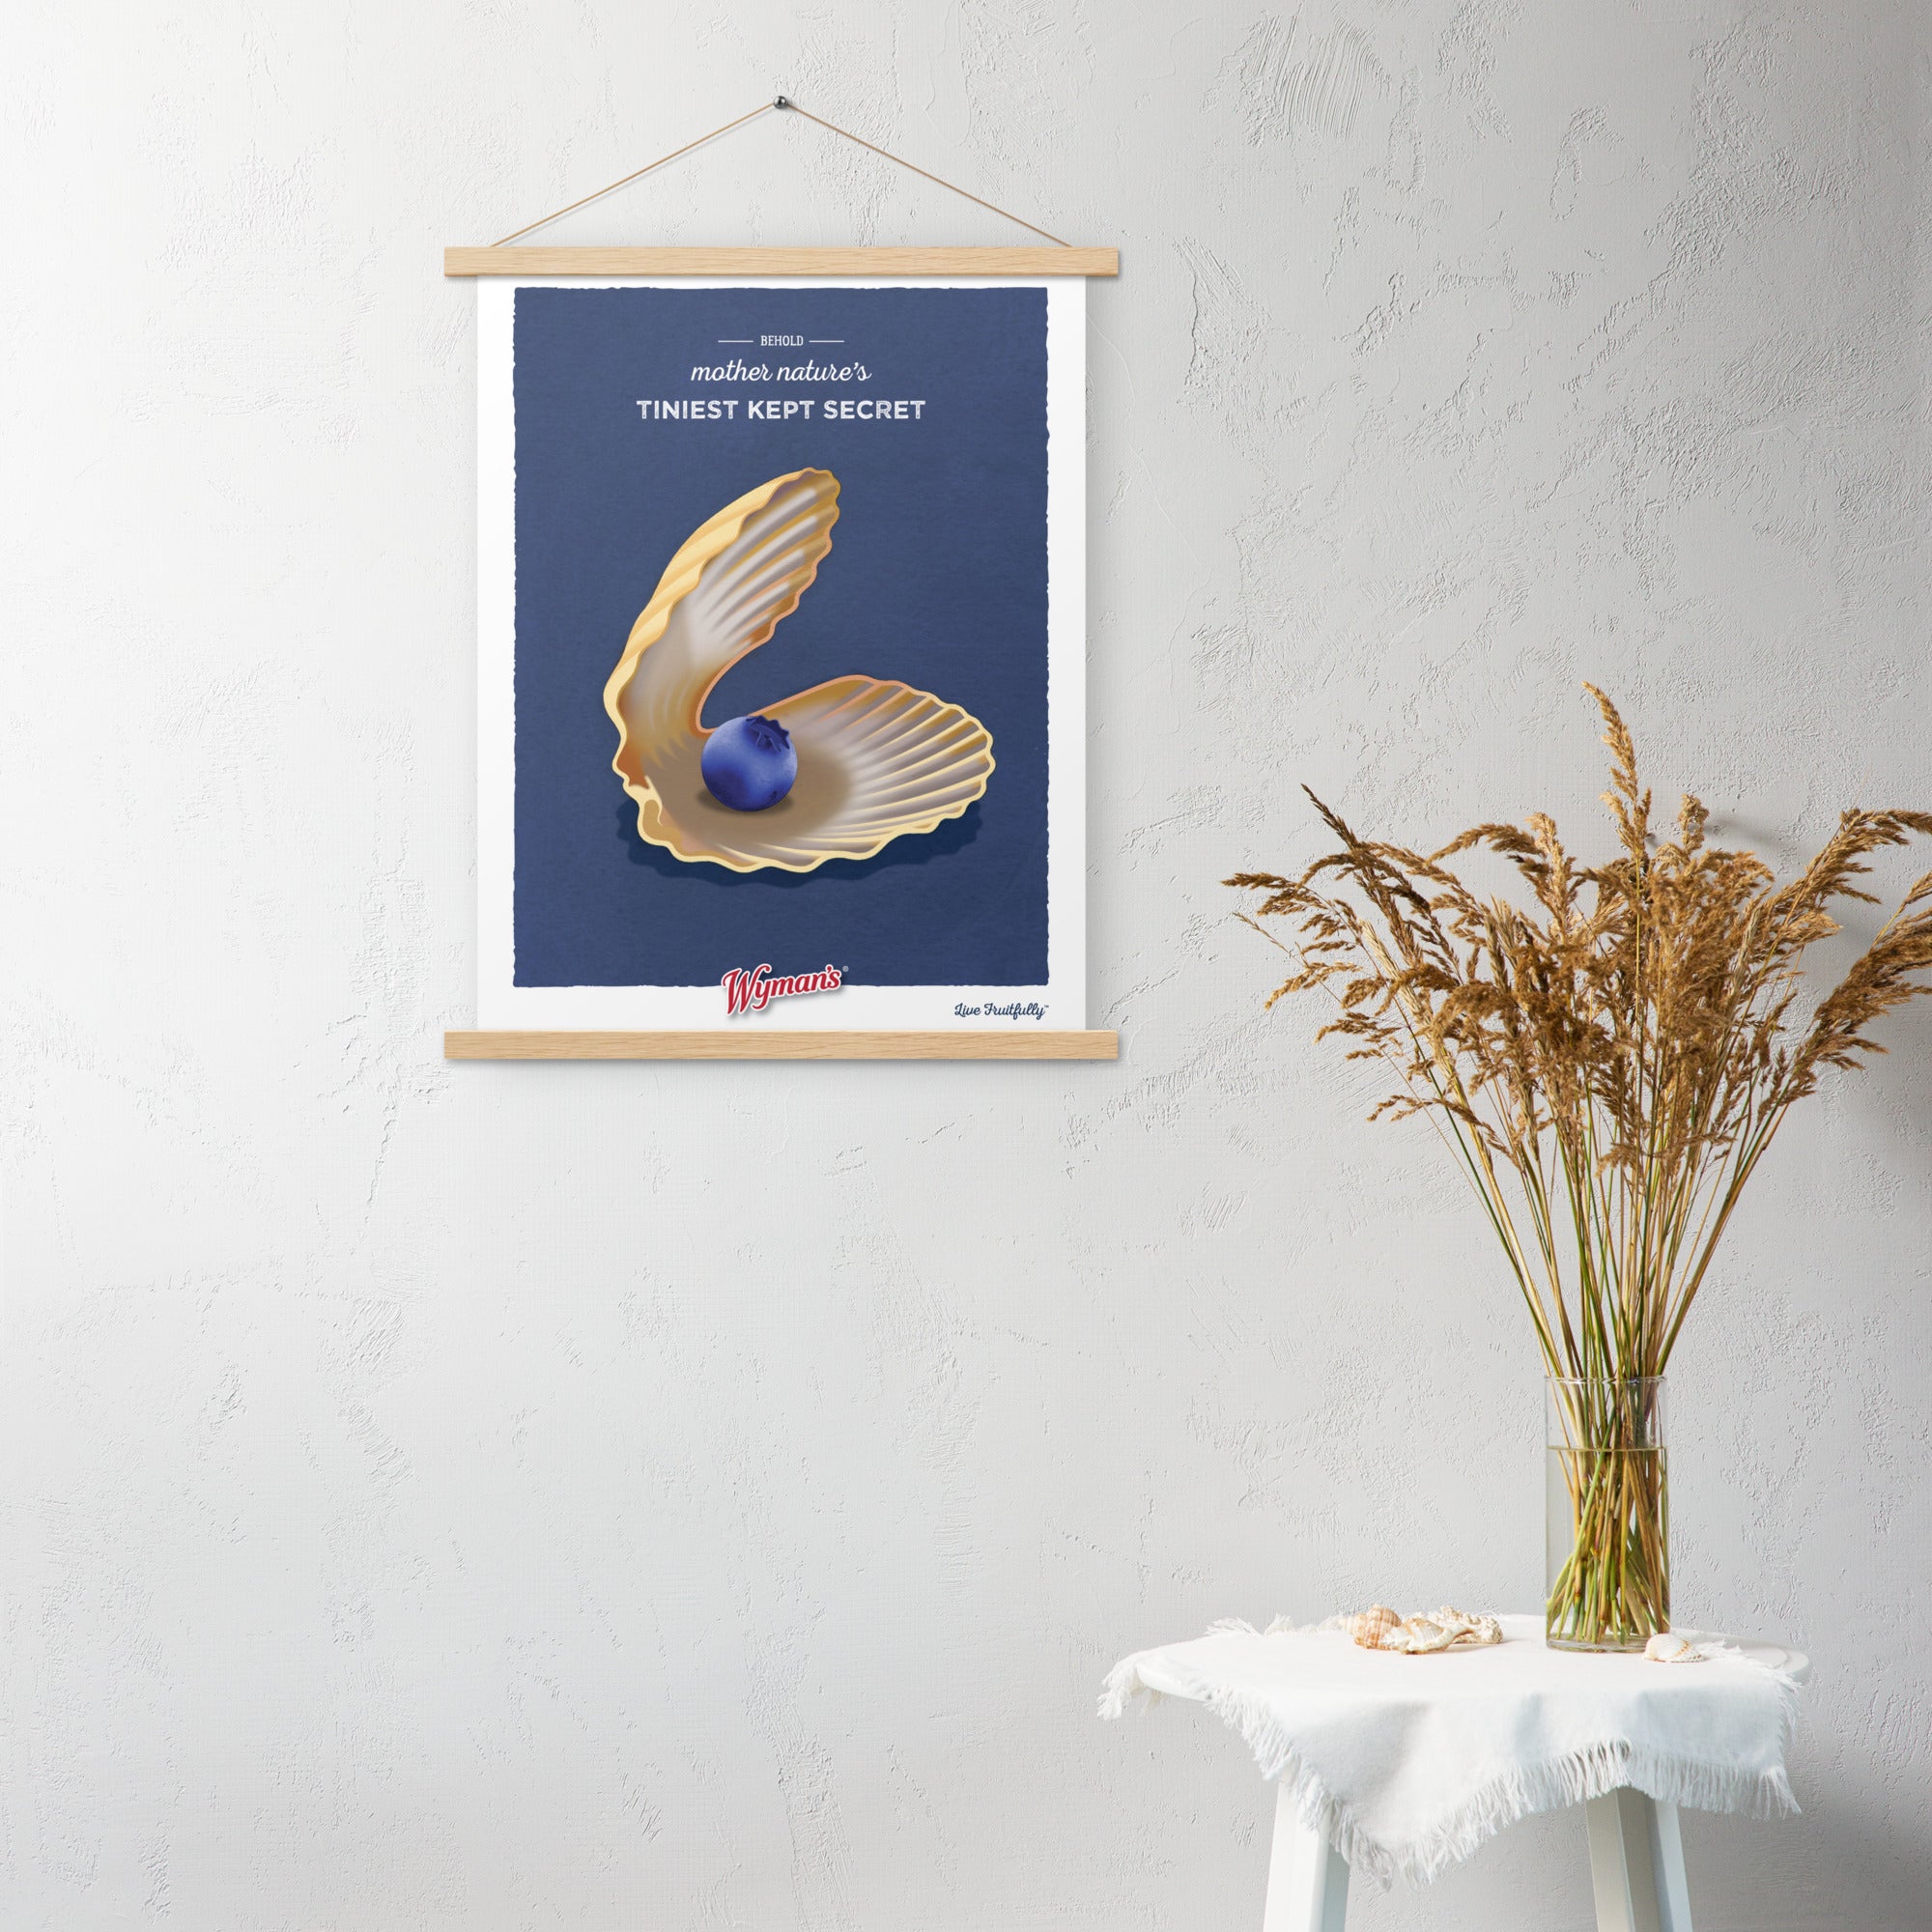 A Behold Mother Nature's Tiniest Kept Secret poster with an image of a shell hanging on a wall from Shop Wyman's.